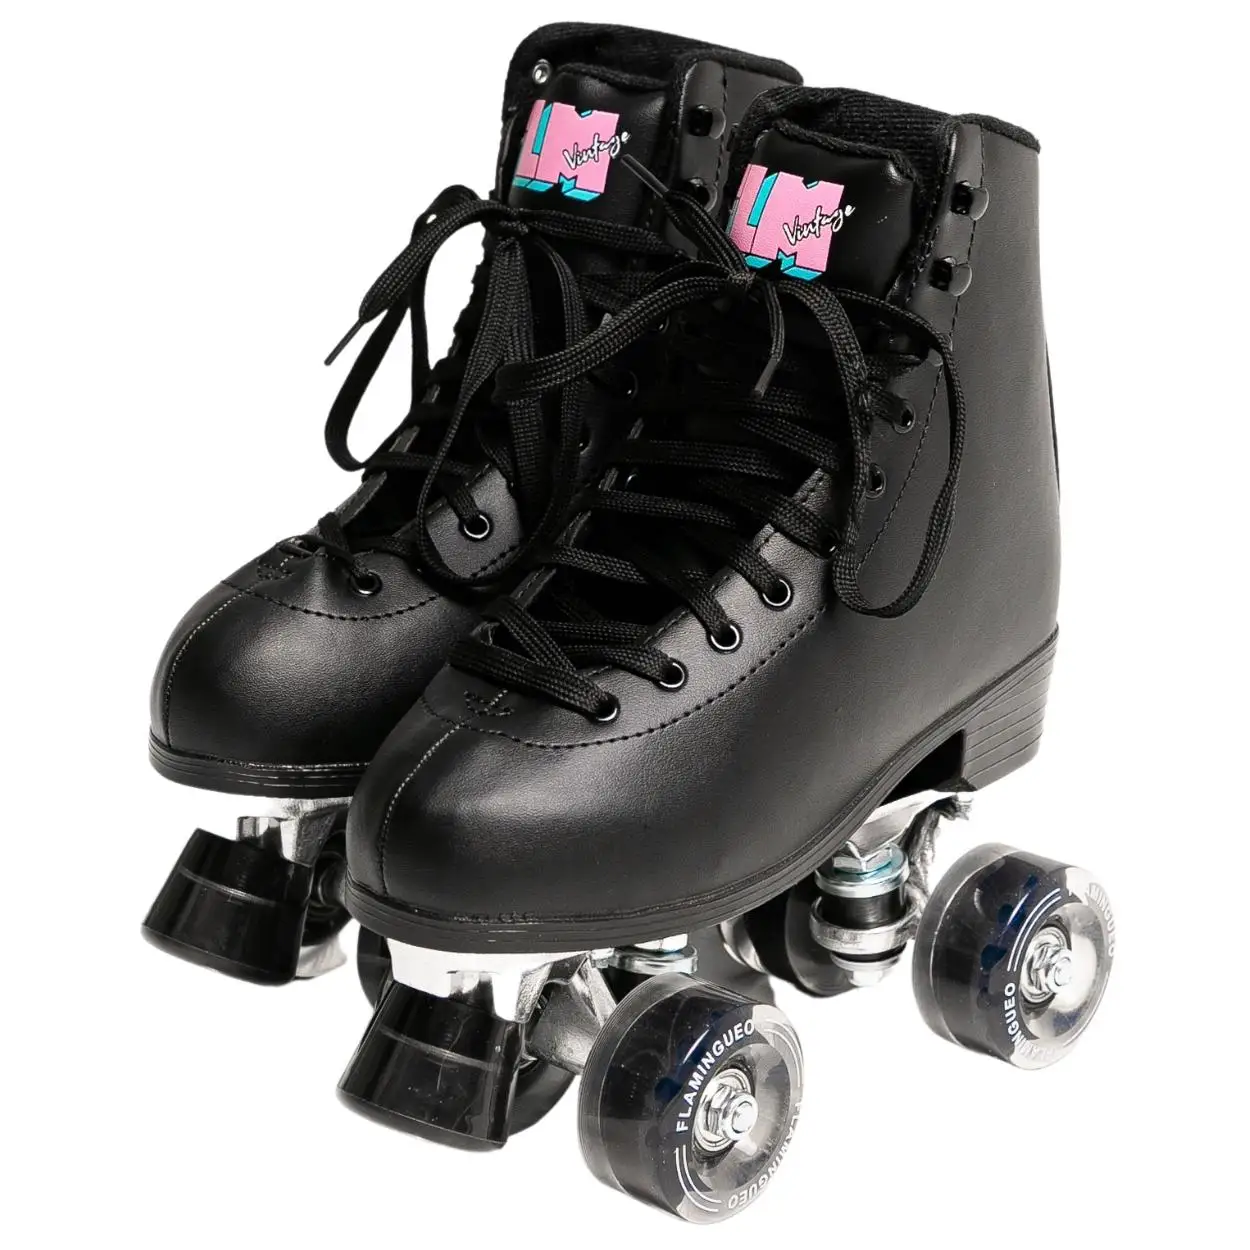 Flamingueo Rollers Patins 4 Roues Design Holographique Roller Skates Roller  Quad Roller 4 Roues Uréthane 58x32mm Patin á Roulettes Taille 35-41 EU  Chaussure Roller Patin a Roulette 4 Roues Roller Femme